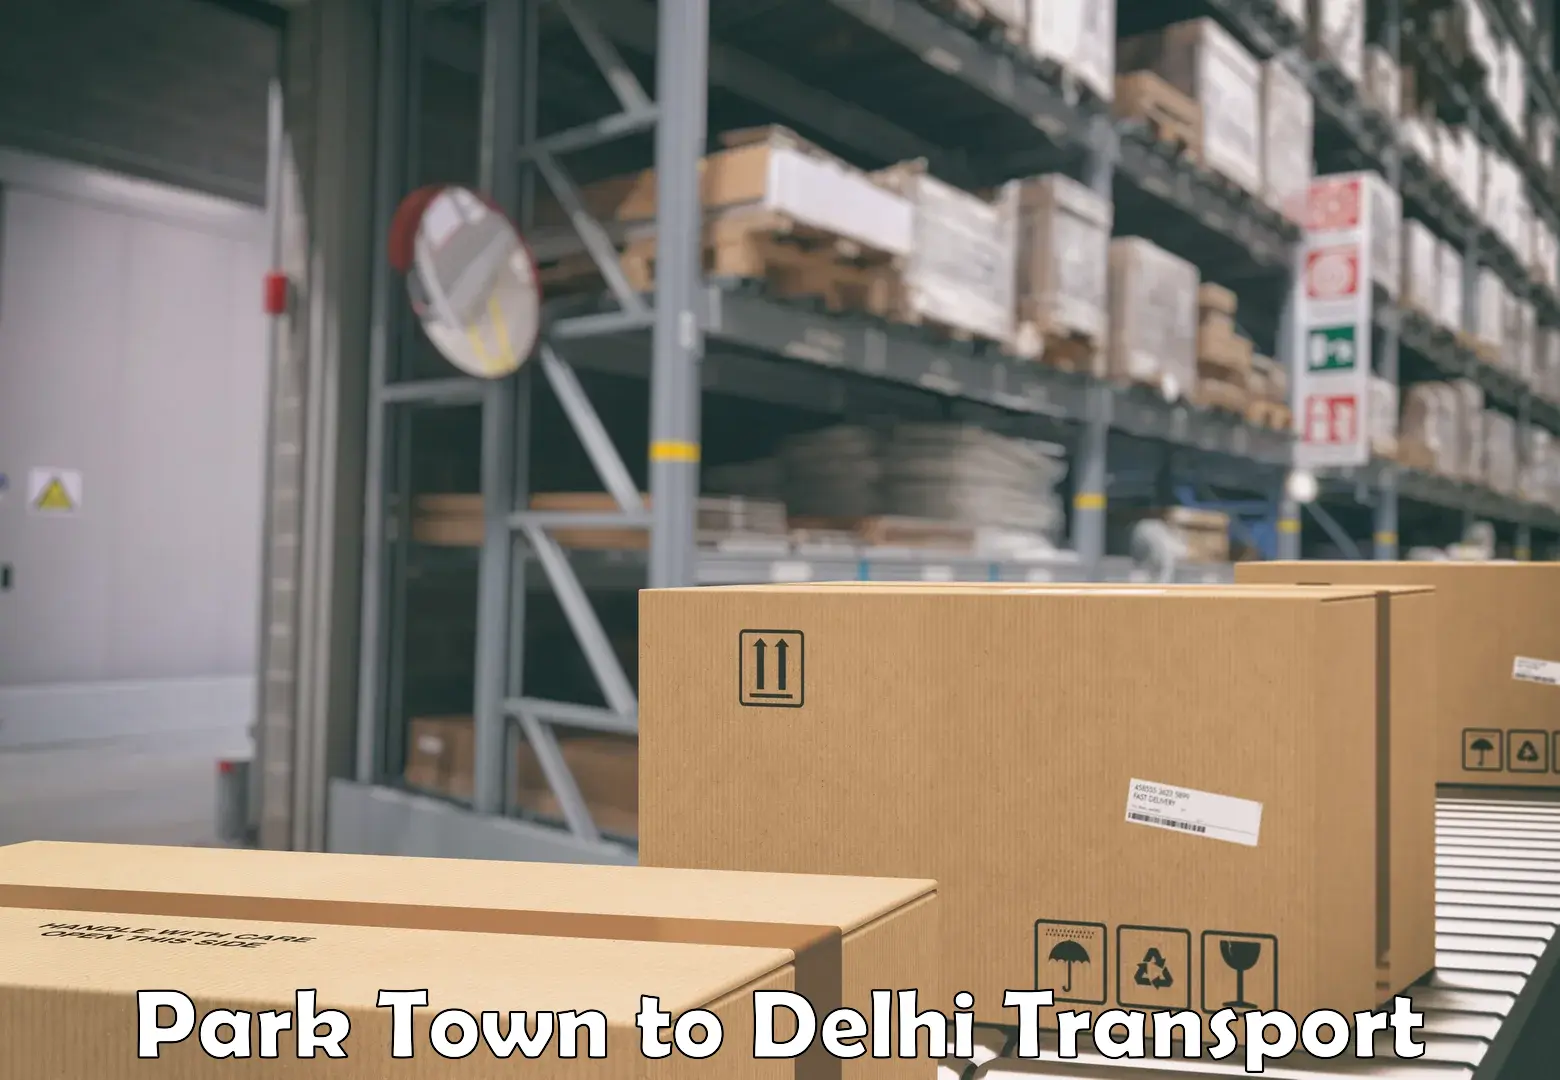 Transport bike from one state to another Park Town to Delhi Technological University DTU